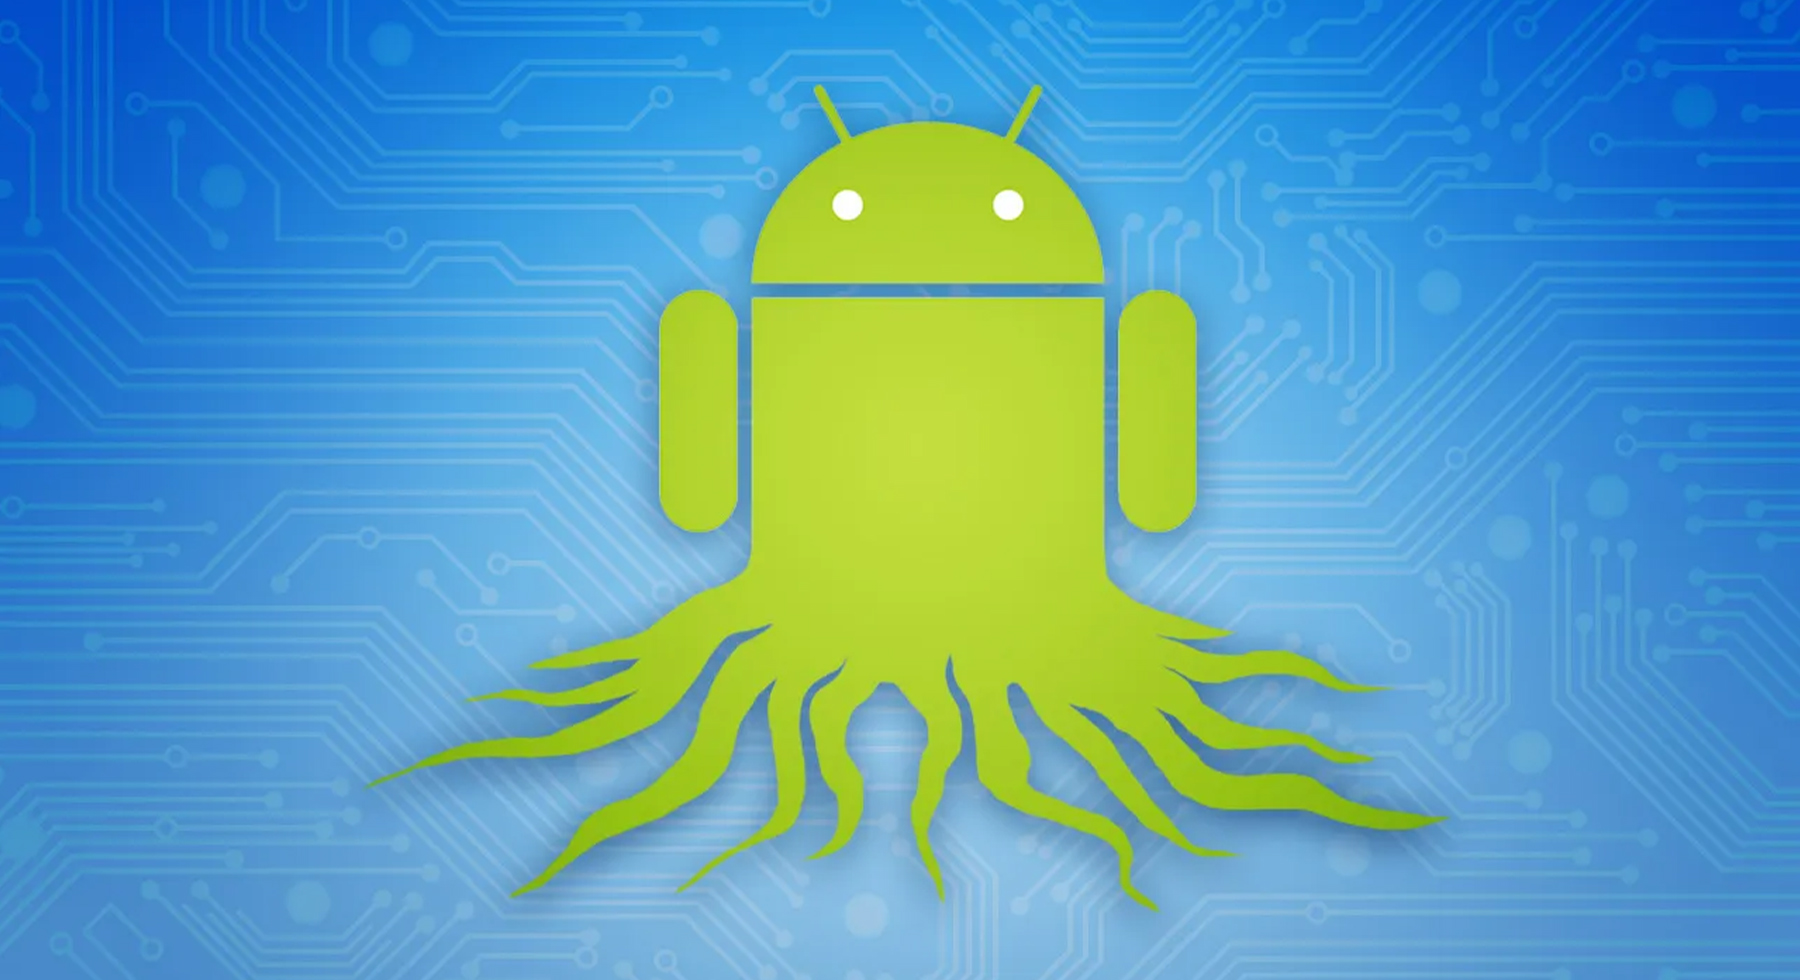 How to Root Your Android Device